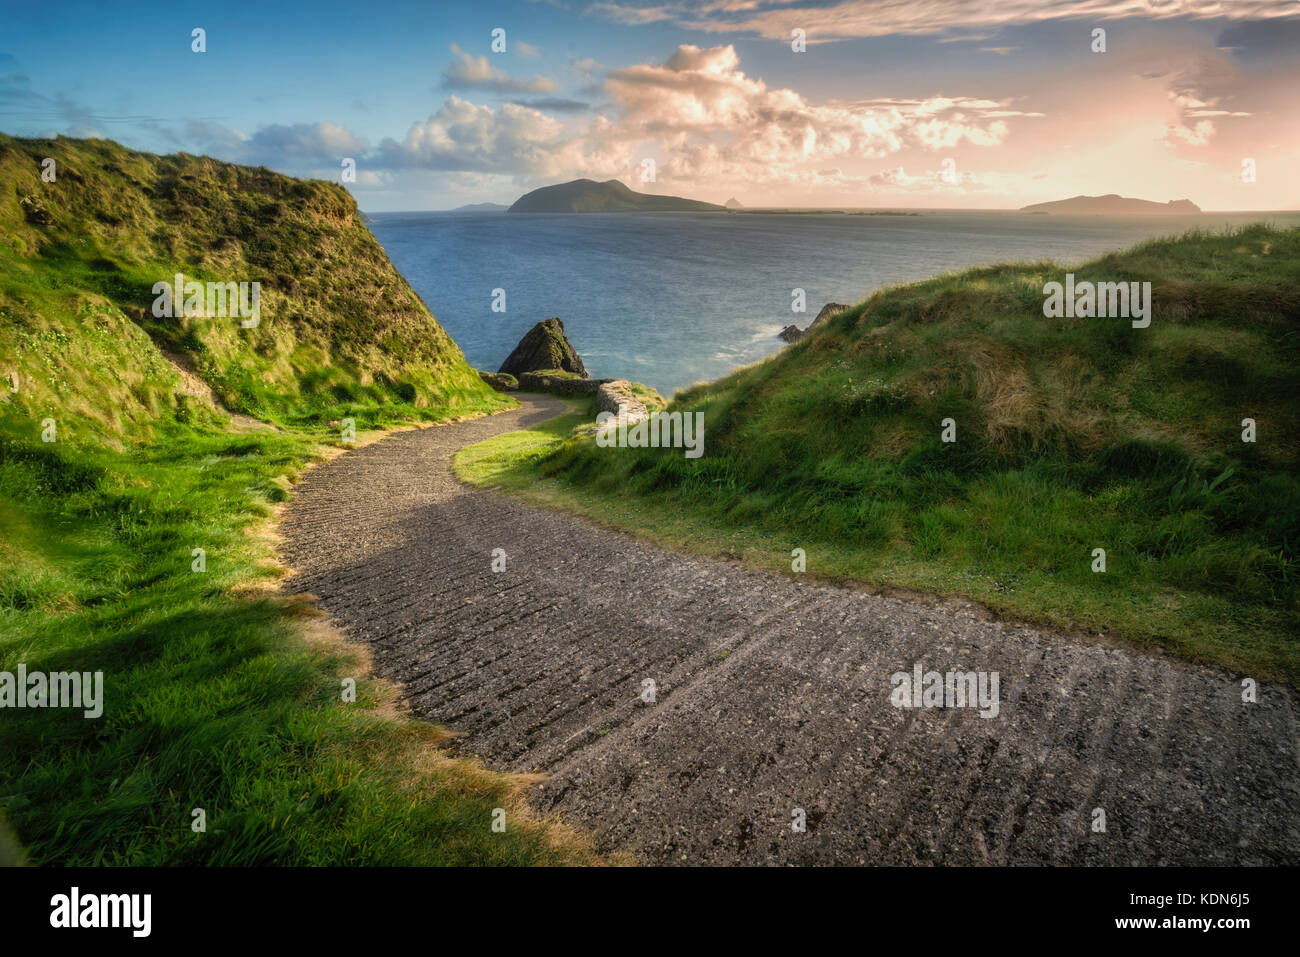 Road to Dunquin Pier with offshore rocks and winding road. County Kerry, Ireland Stock Photo